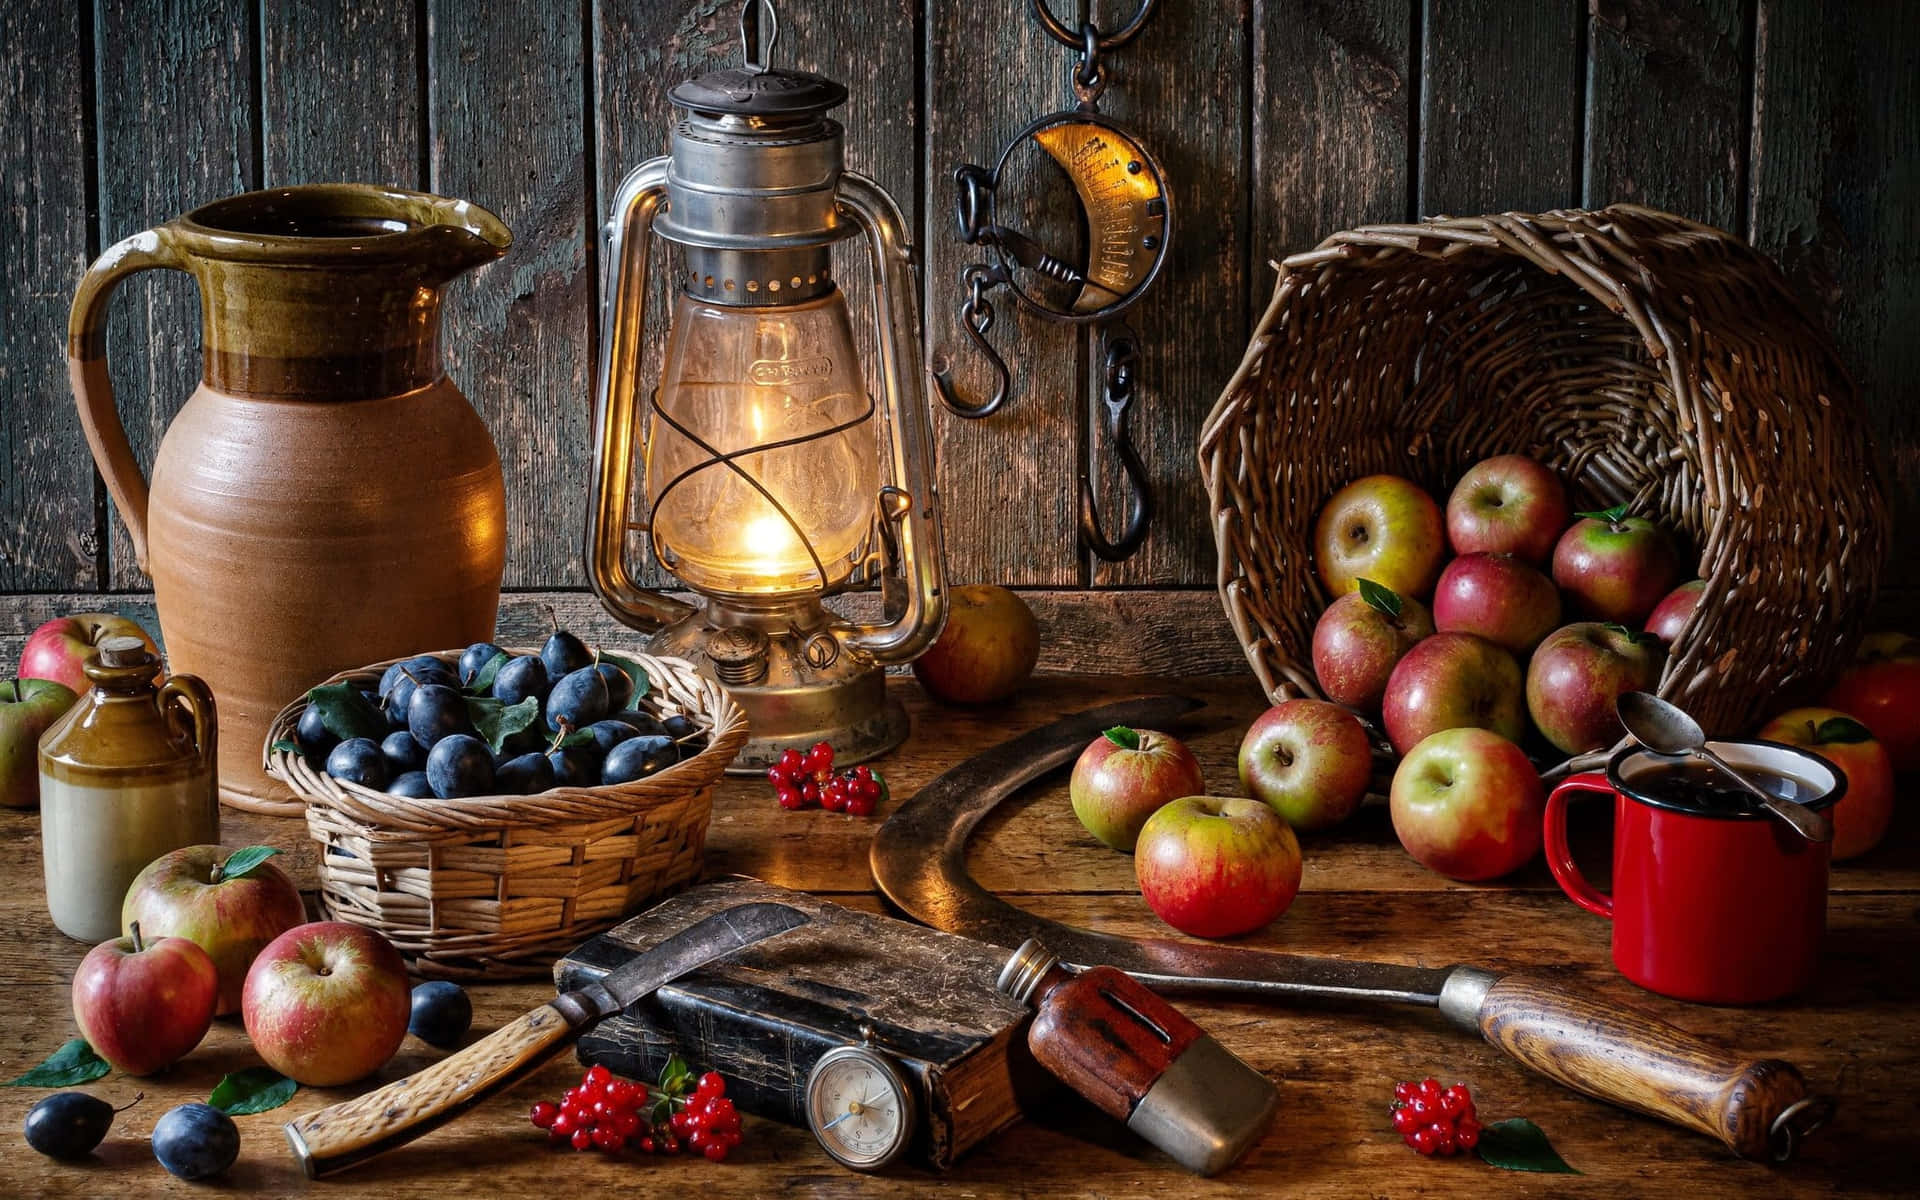 Caption: A Collection of Harvest Foods on a Table during Autumn Wallpaper